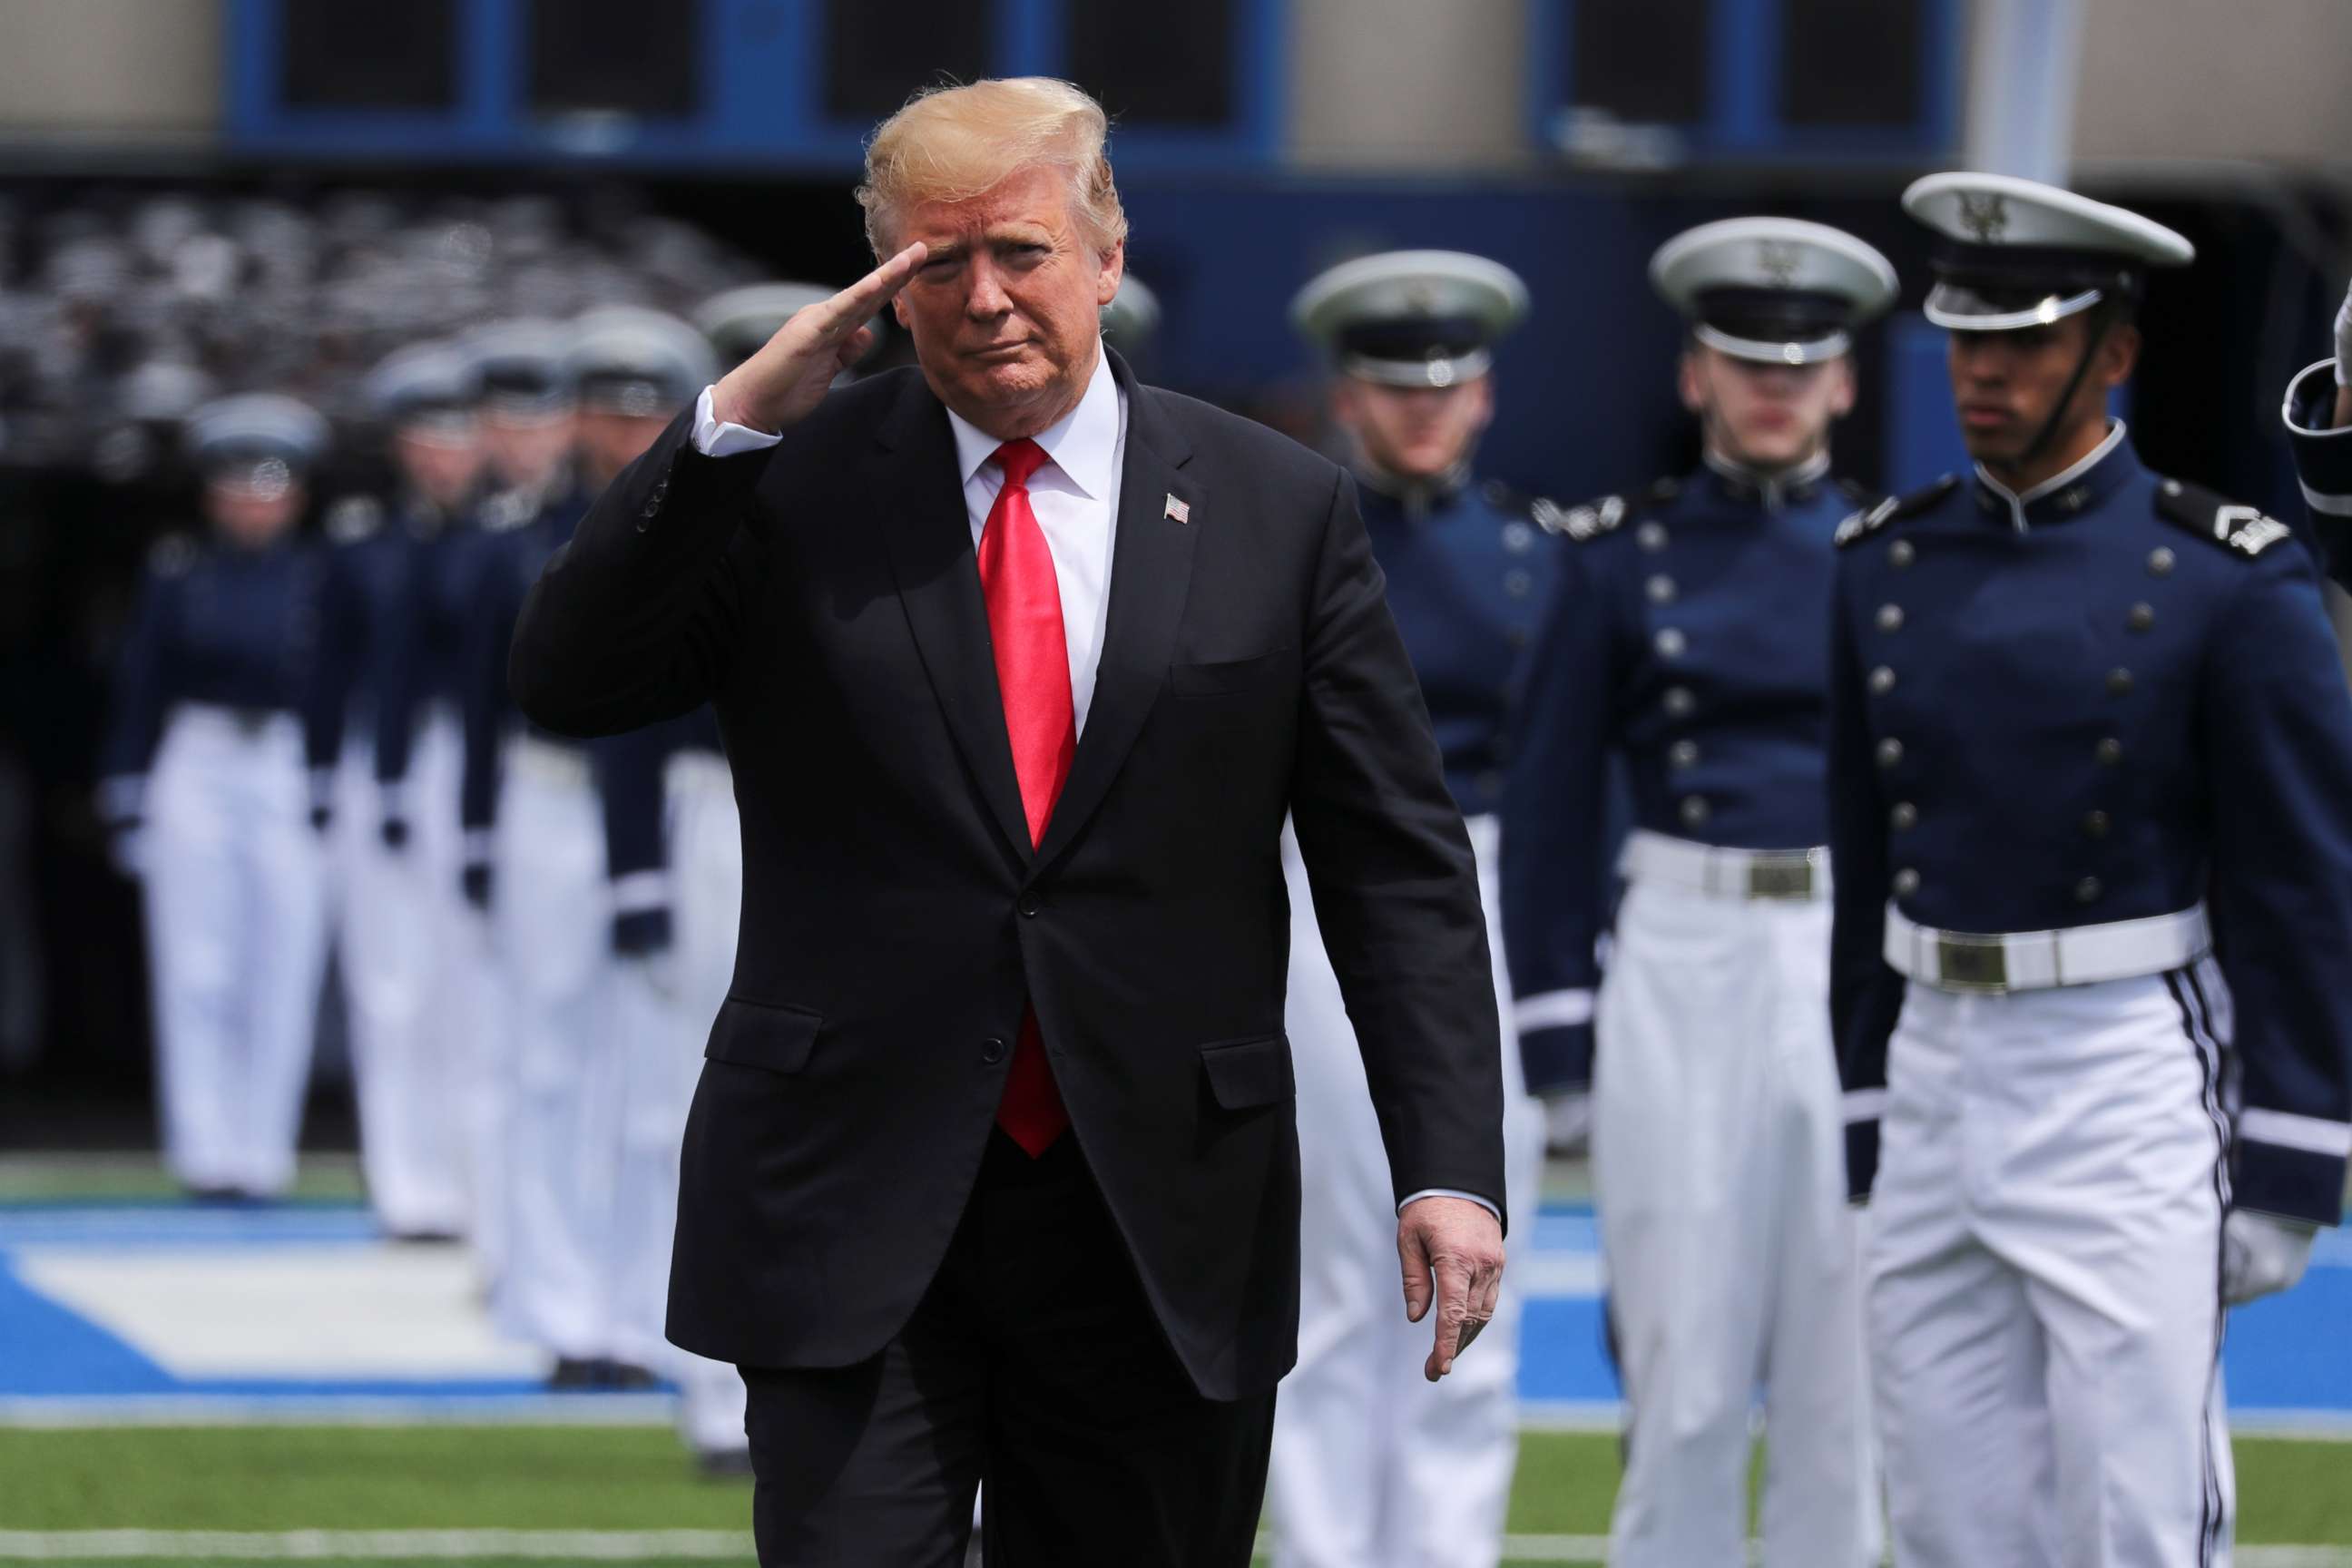 PHOTO: President Donald Trump arrives to deliver the commencement address at the U.S. Air Force Academy's graduation ceremony in Colorado Springs, Colo., May 30, 2019.